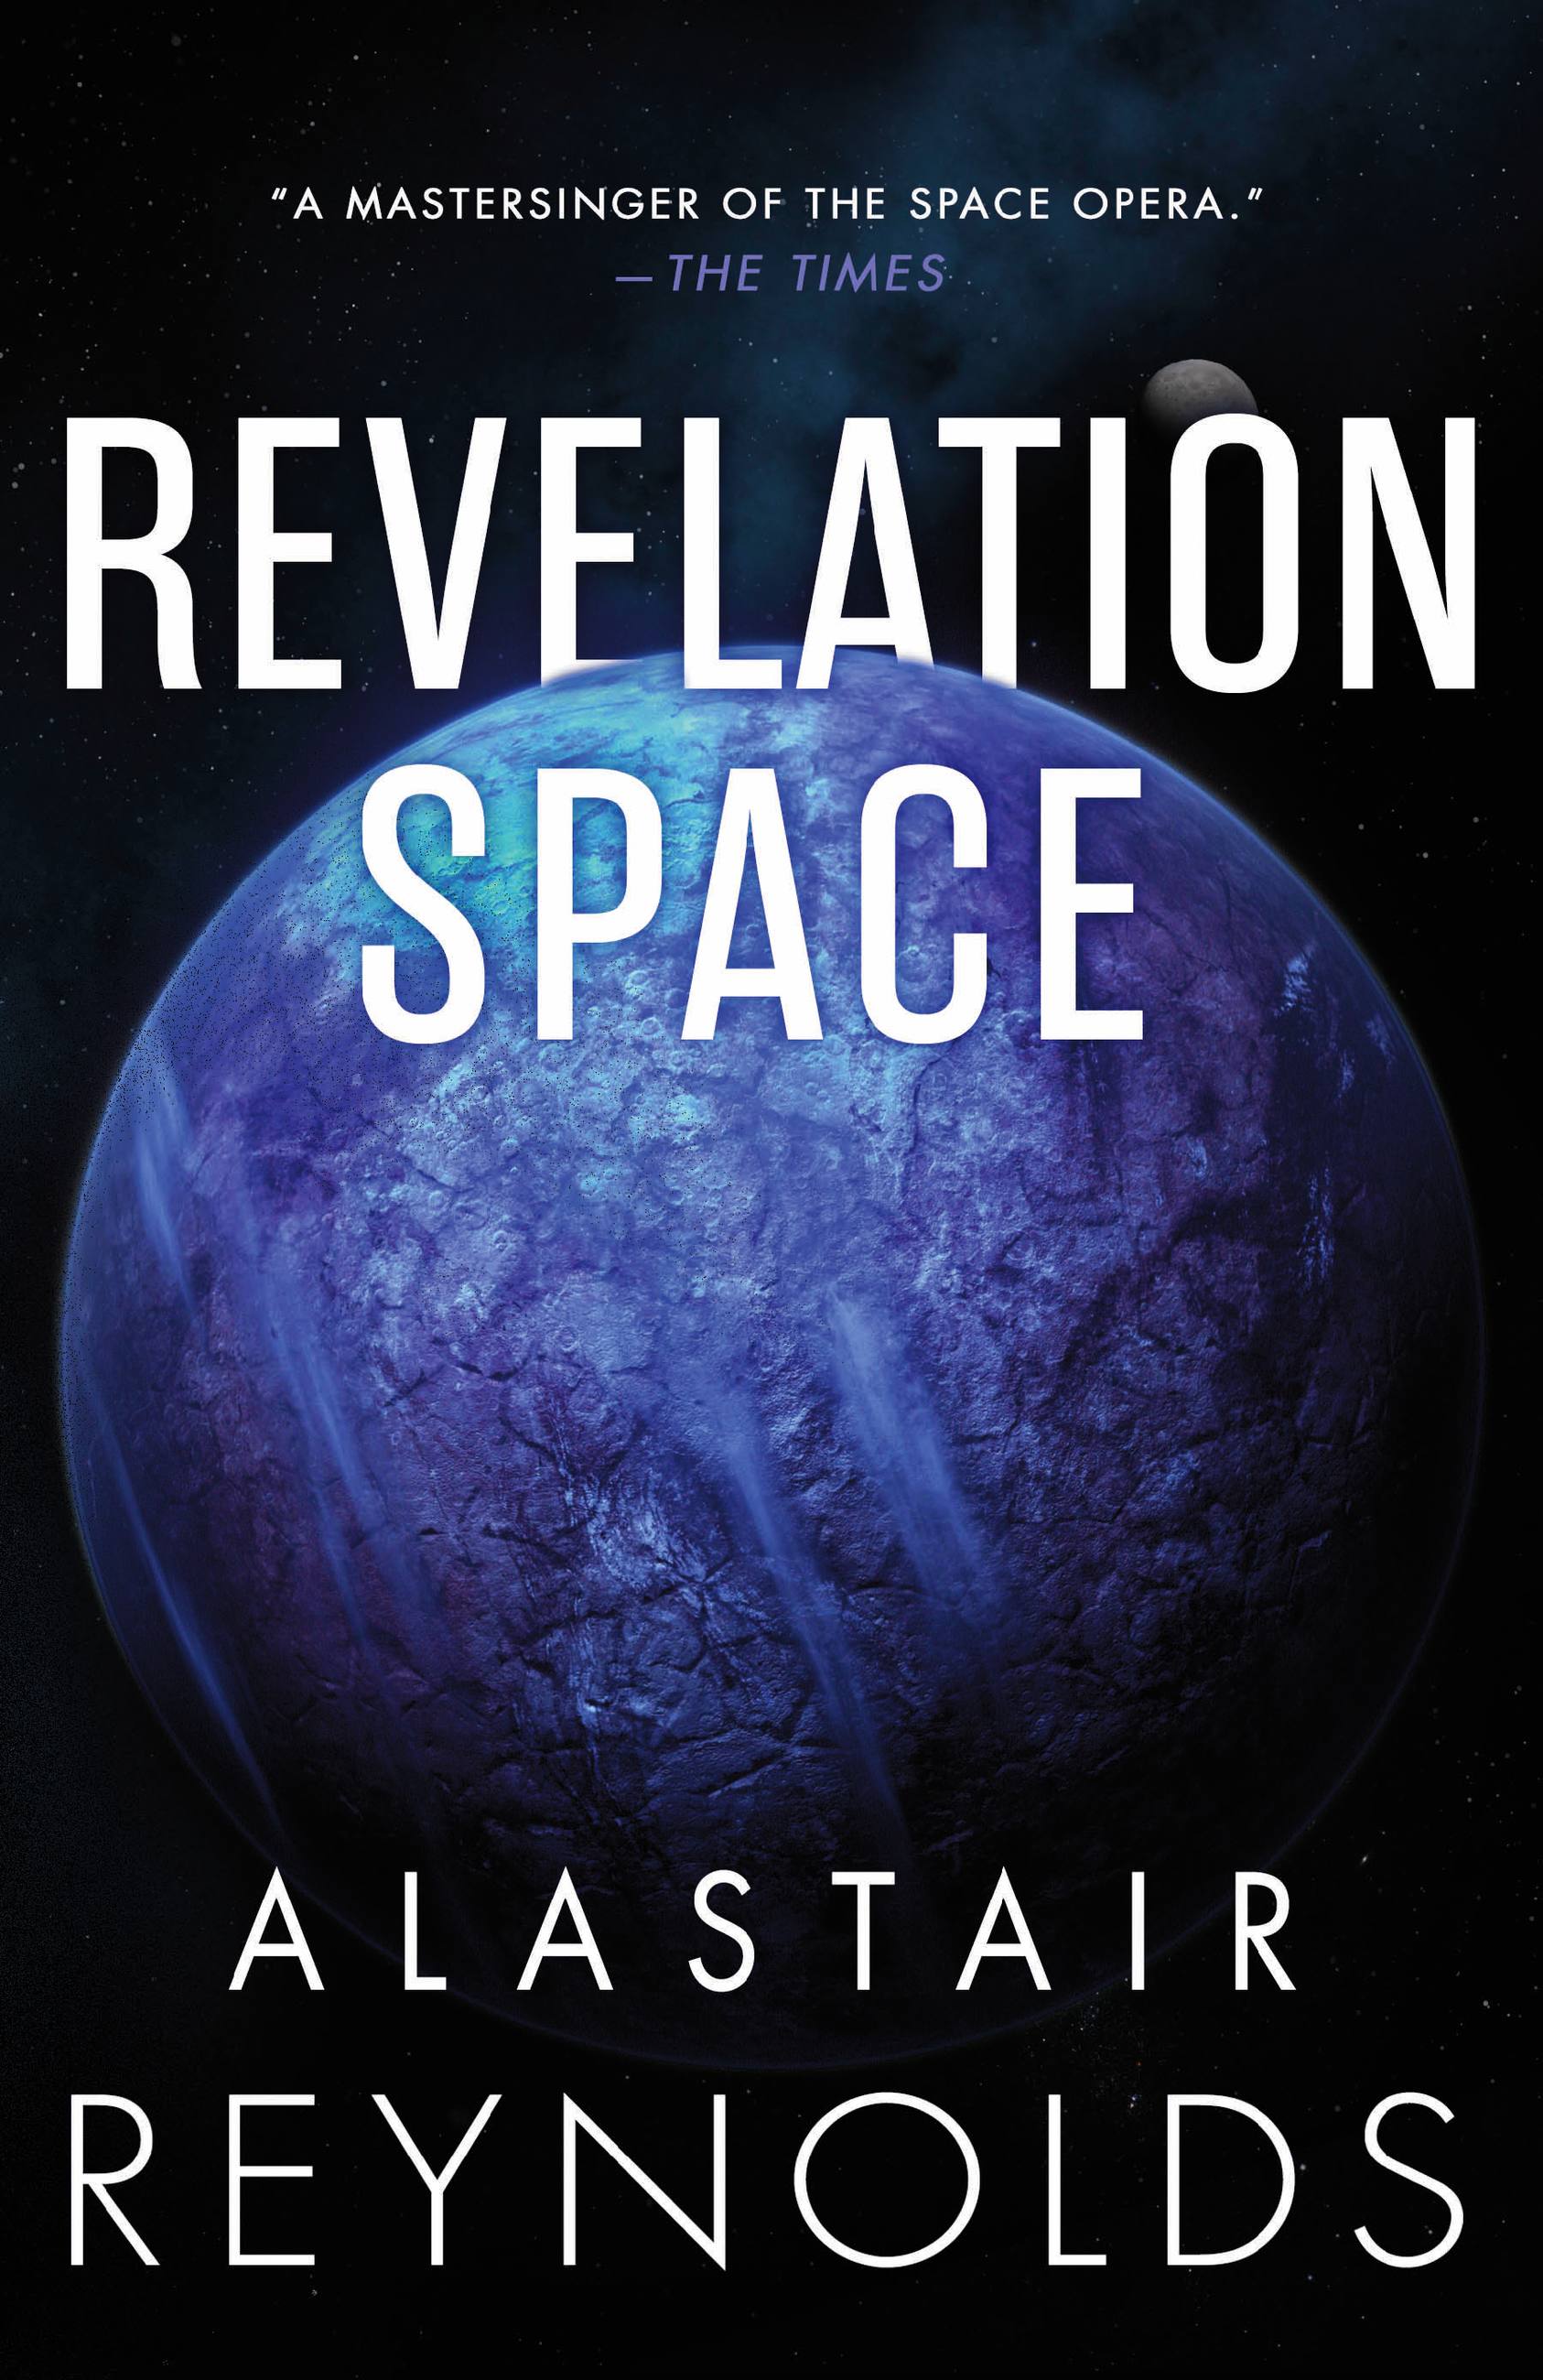 The next Alastair Reynolds short story collection? Possible